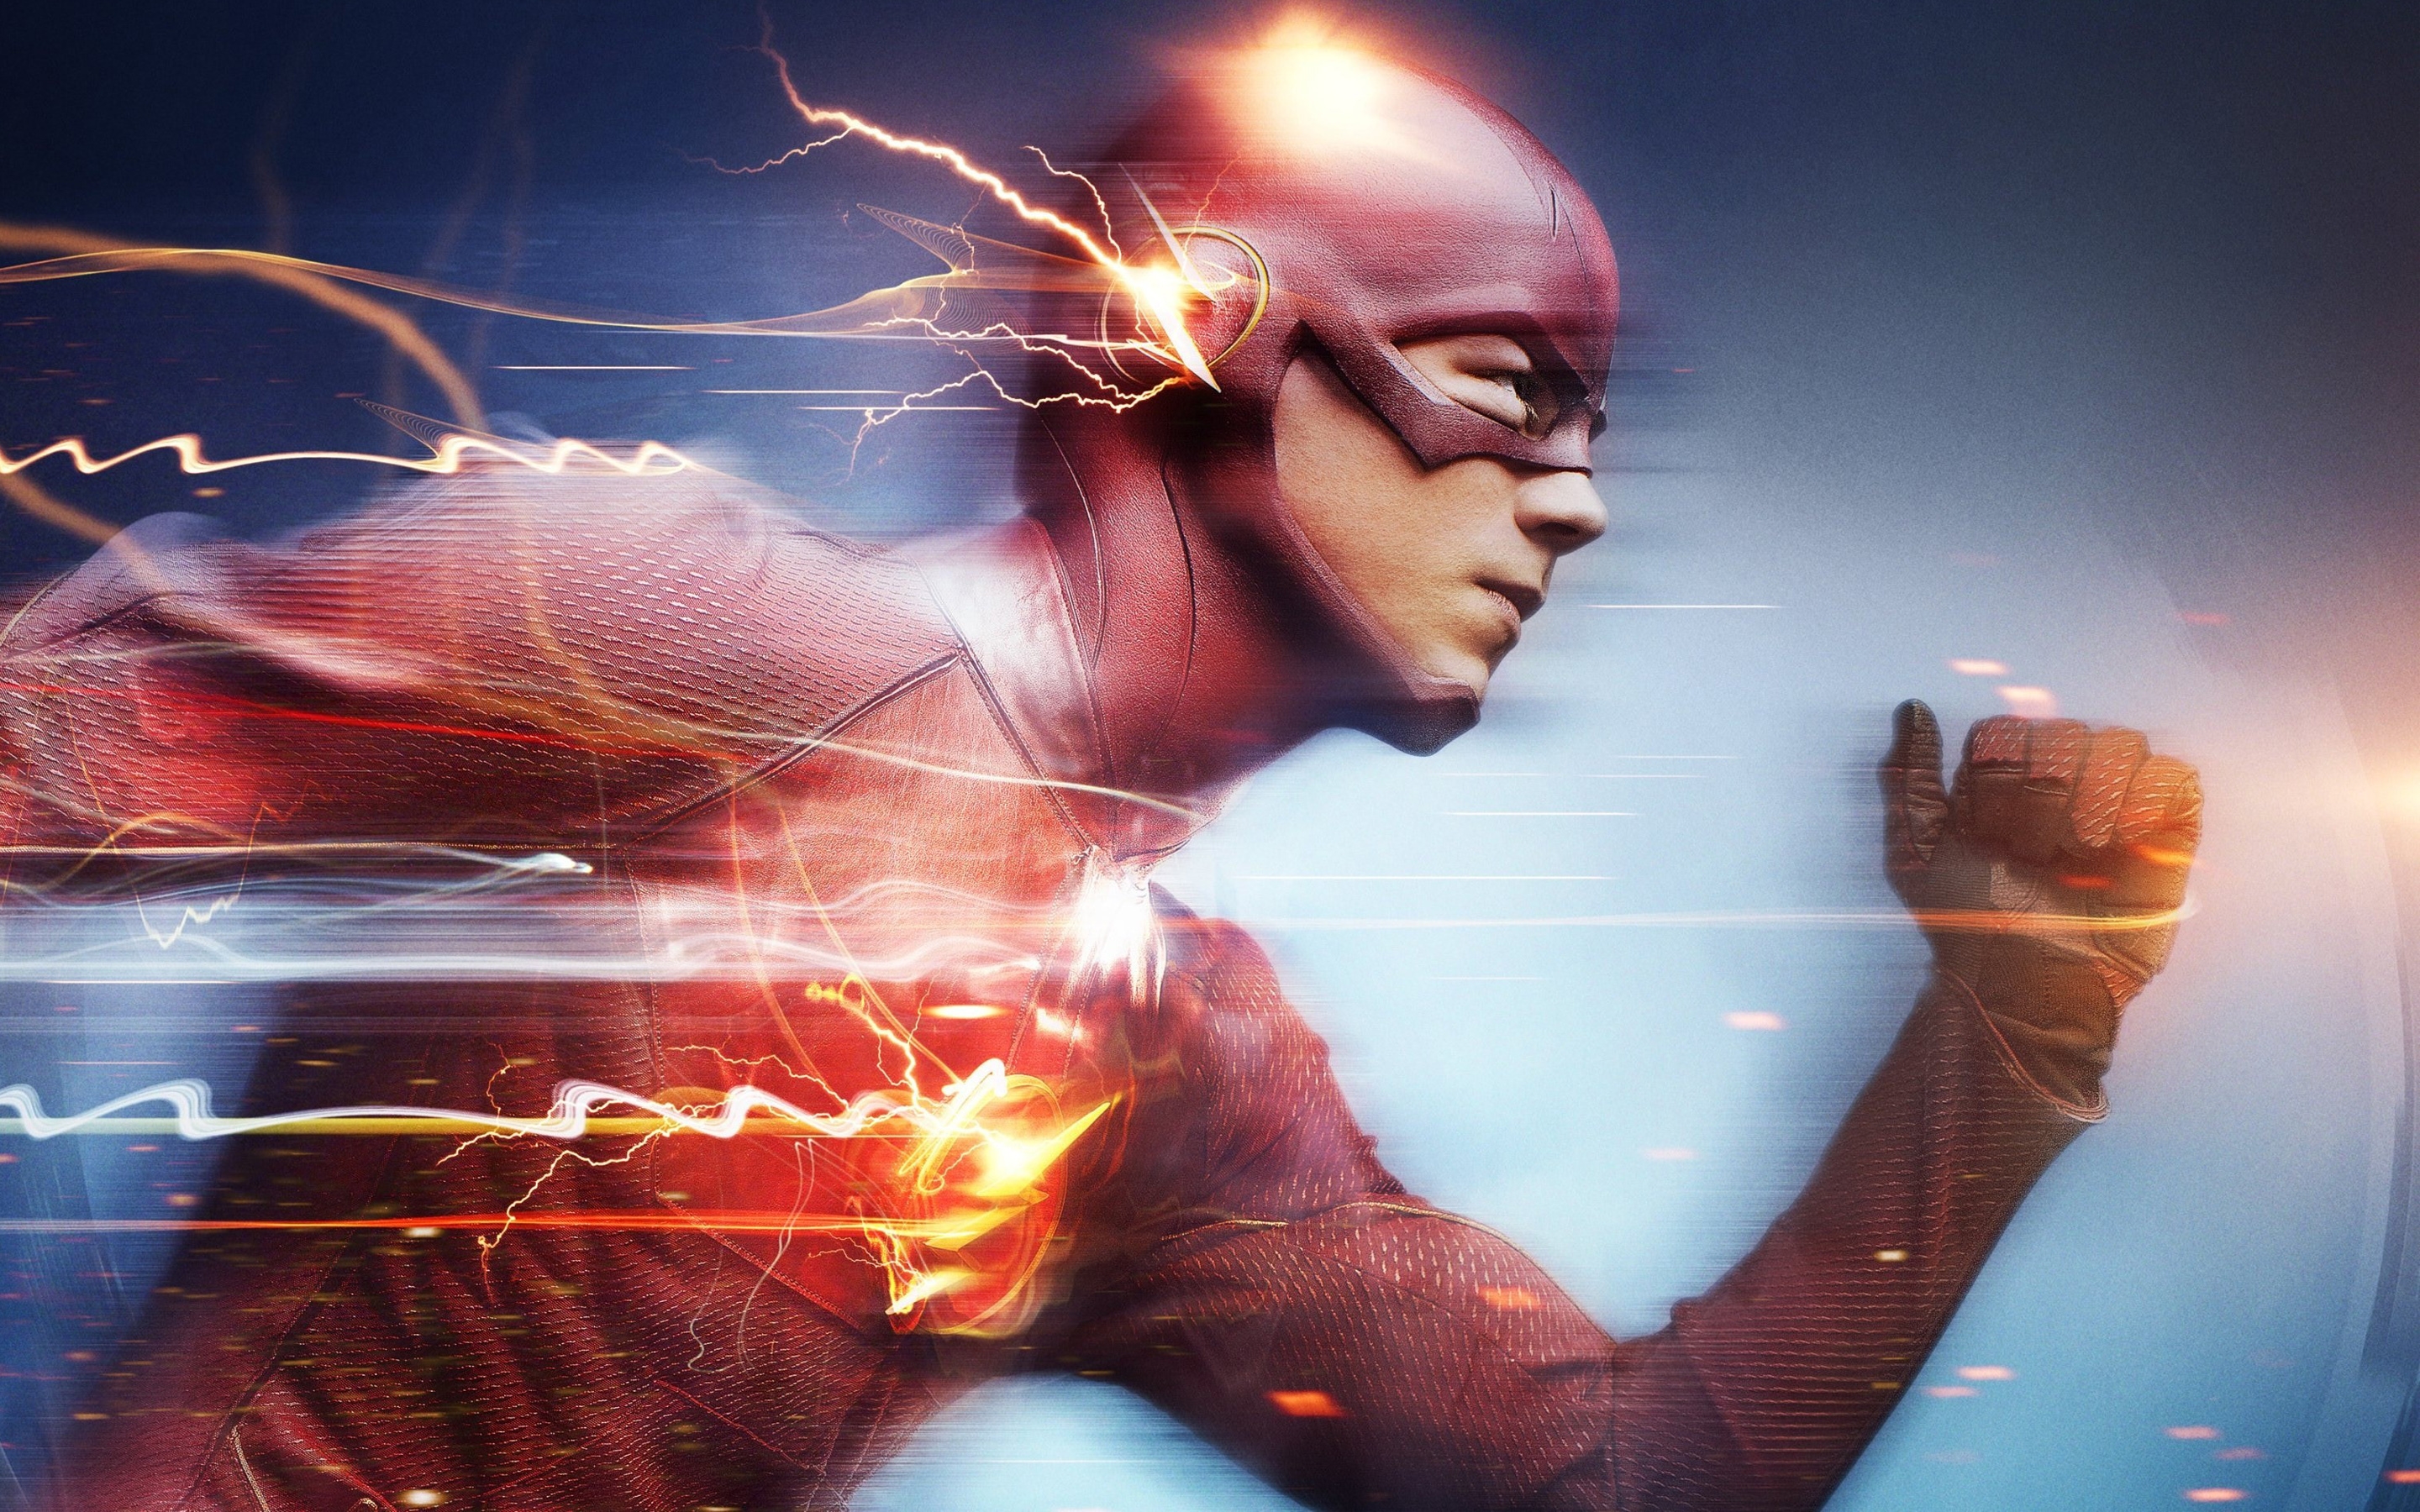 Barry Allen The Flash for 2880 x 1800 Retina Display resolution